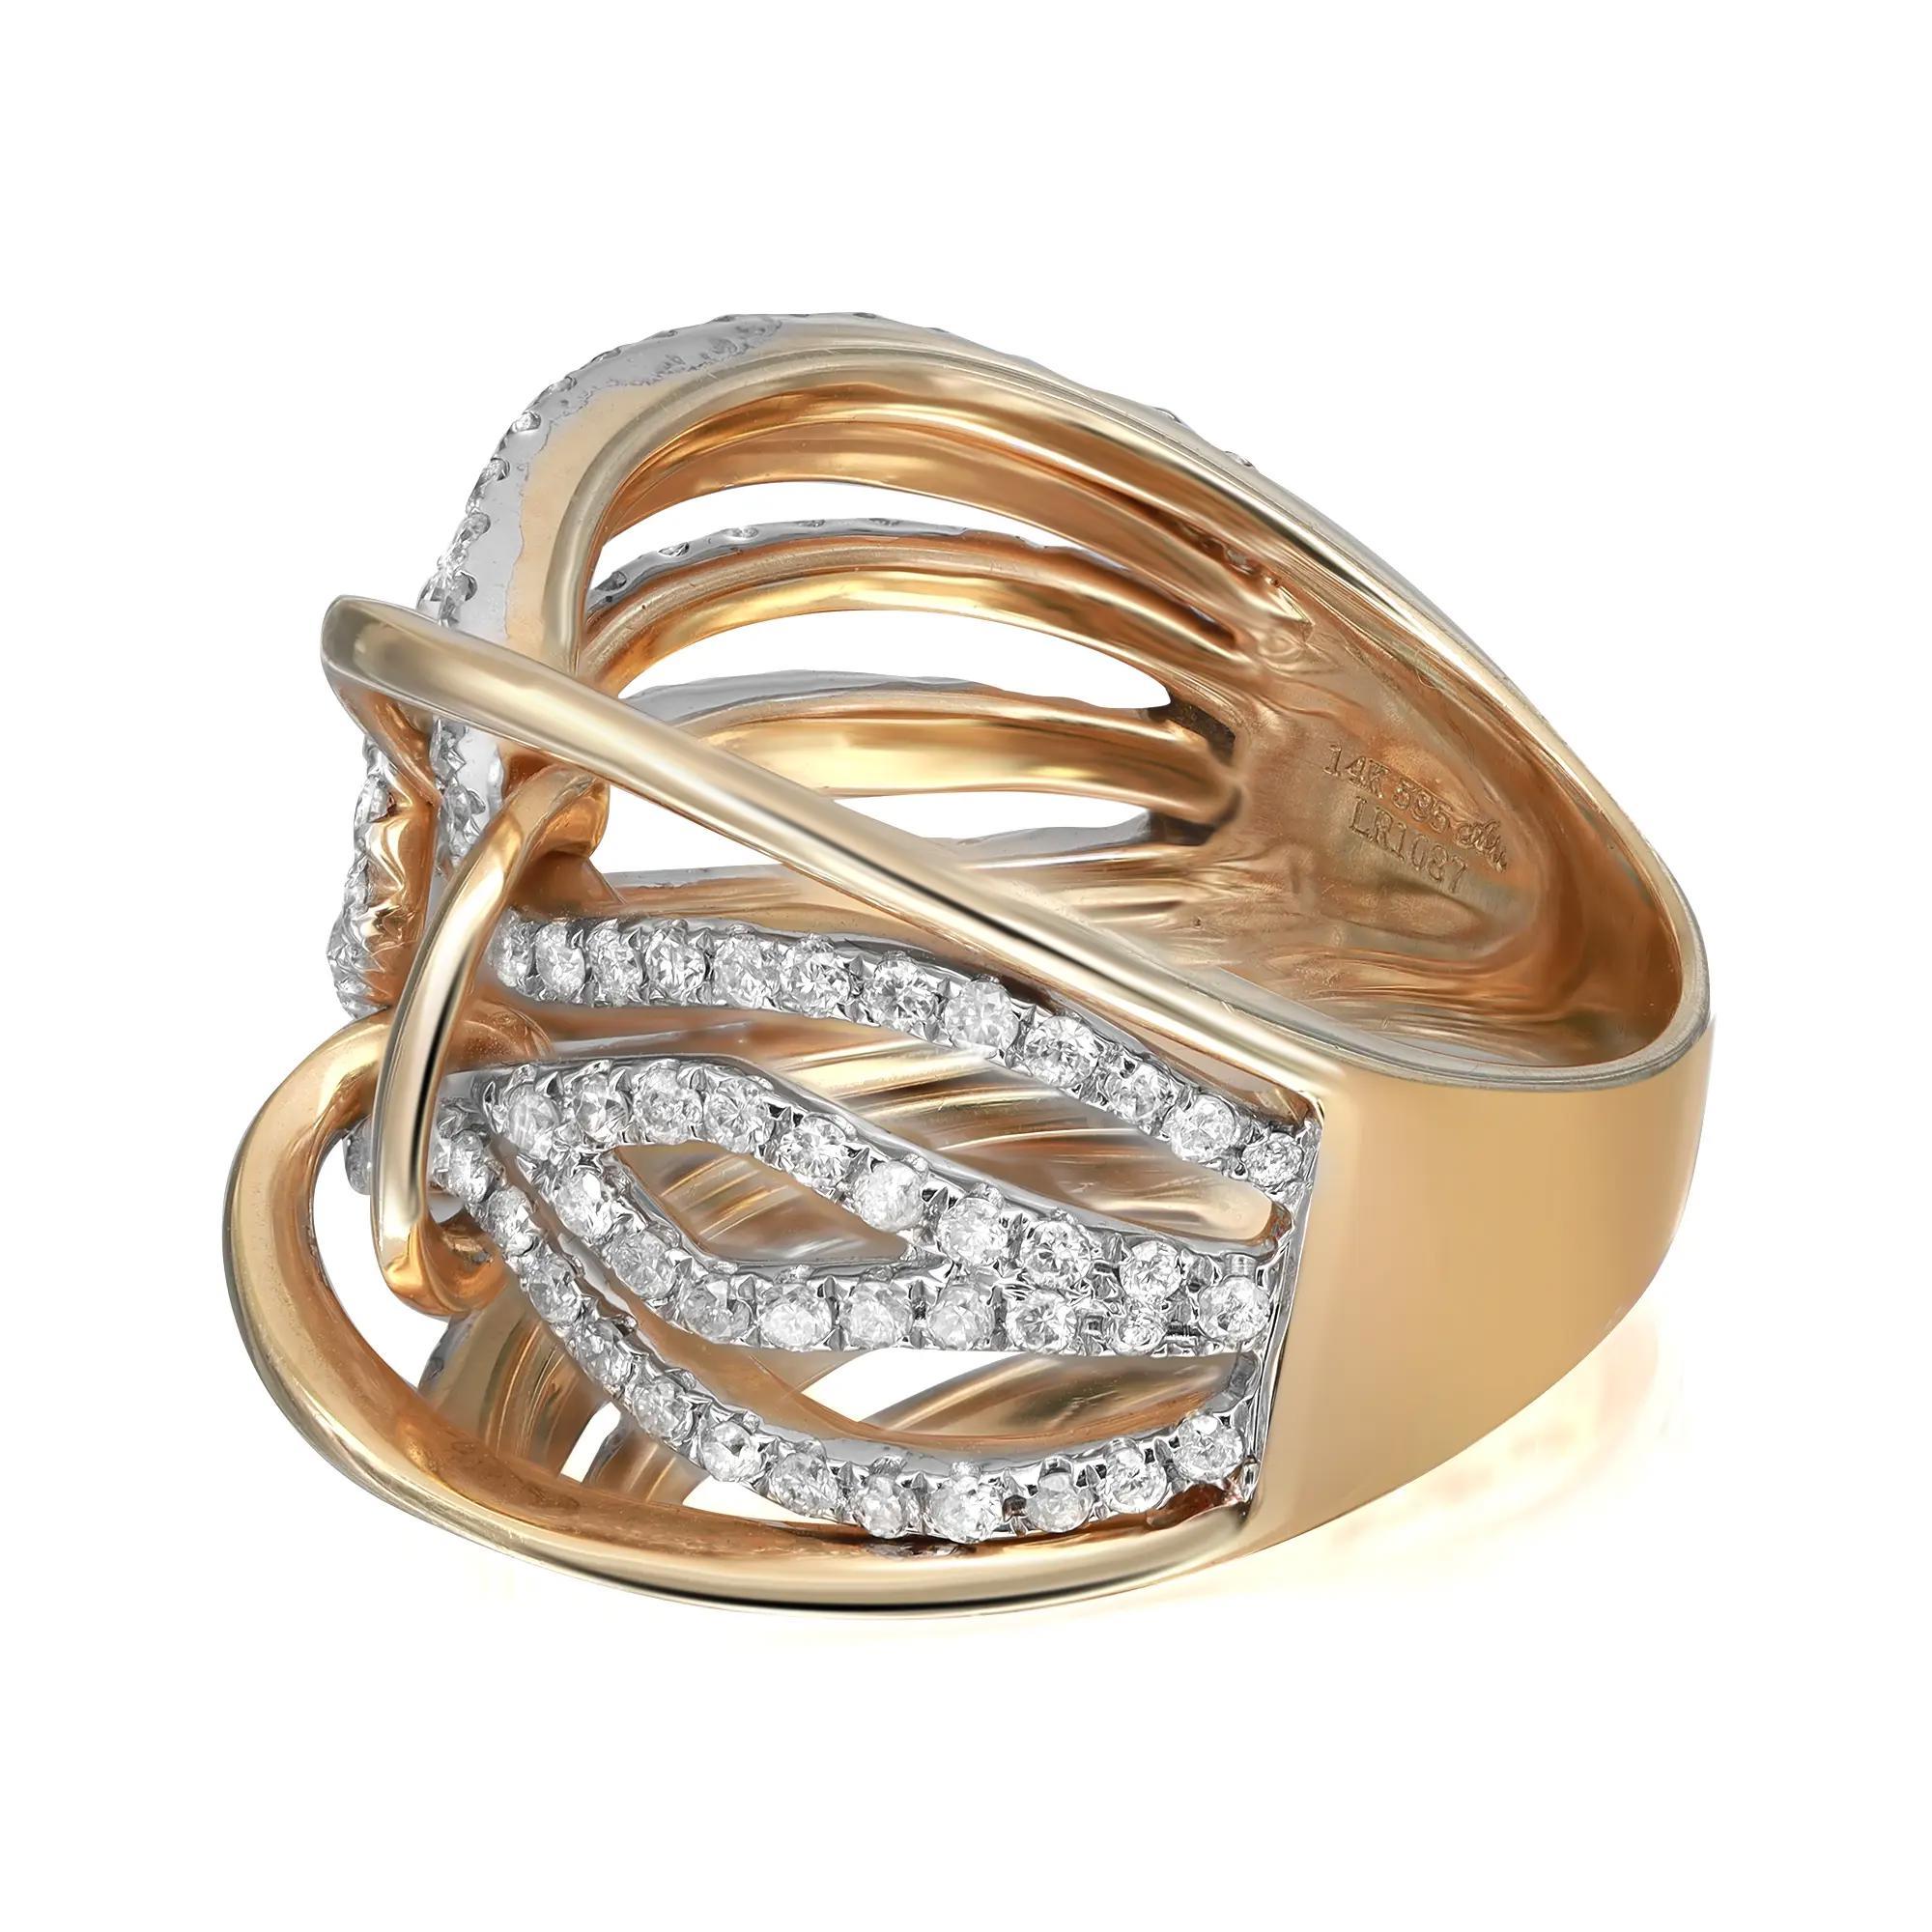 Sparkle with this diamond wide band ring. This ring showcases a polished look with its round-cut diamond stones in pave setting. Crafted in 14K yellow gold. Perfect gift for your loved ones. The width of the ring is 14.5 mm. Diamond quality: color I